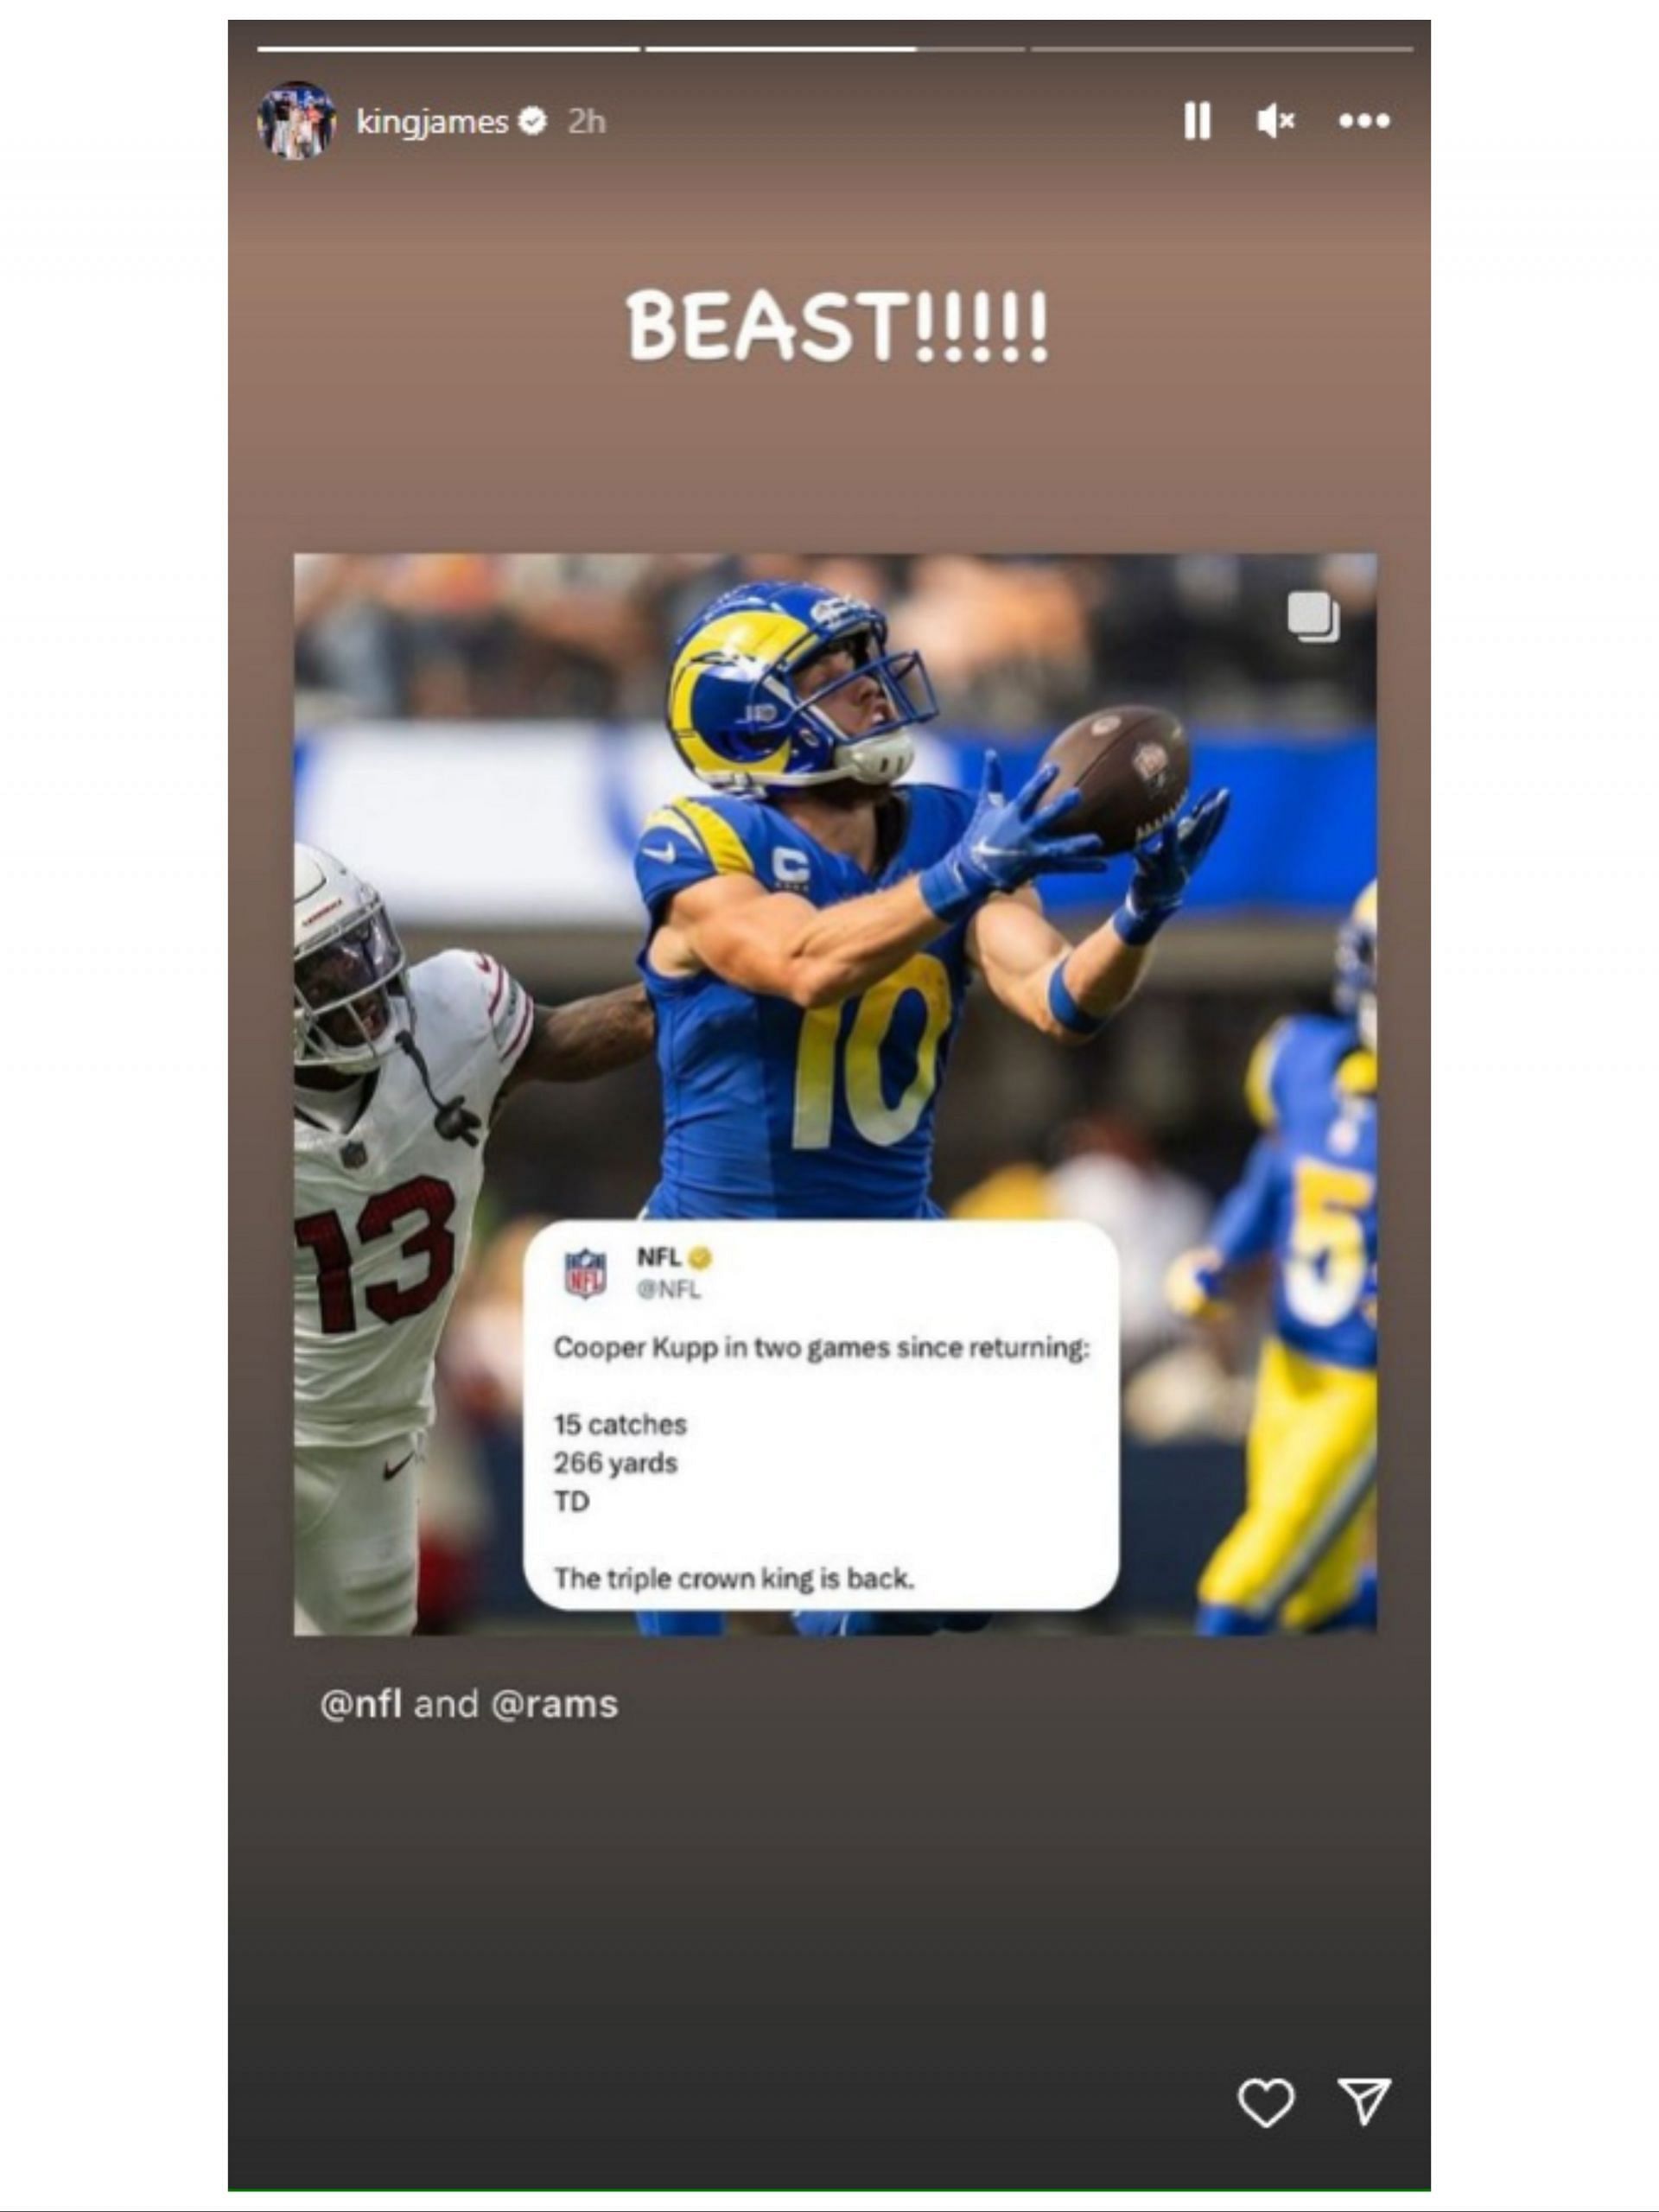 LeBron giving Kupp a shout out on Instagram